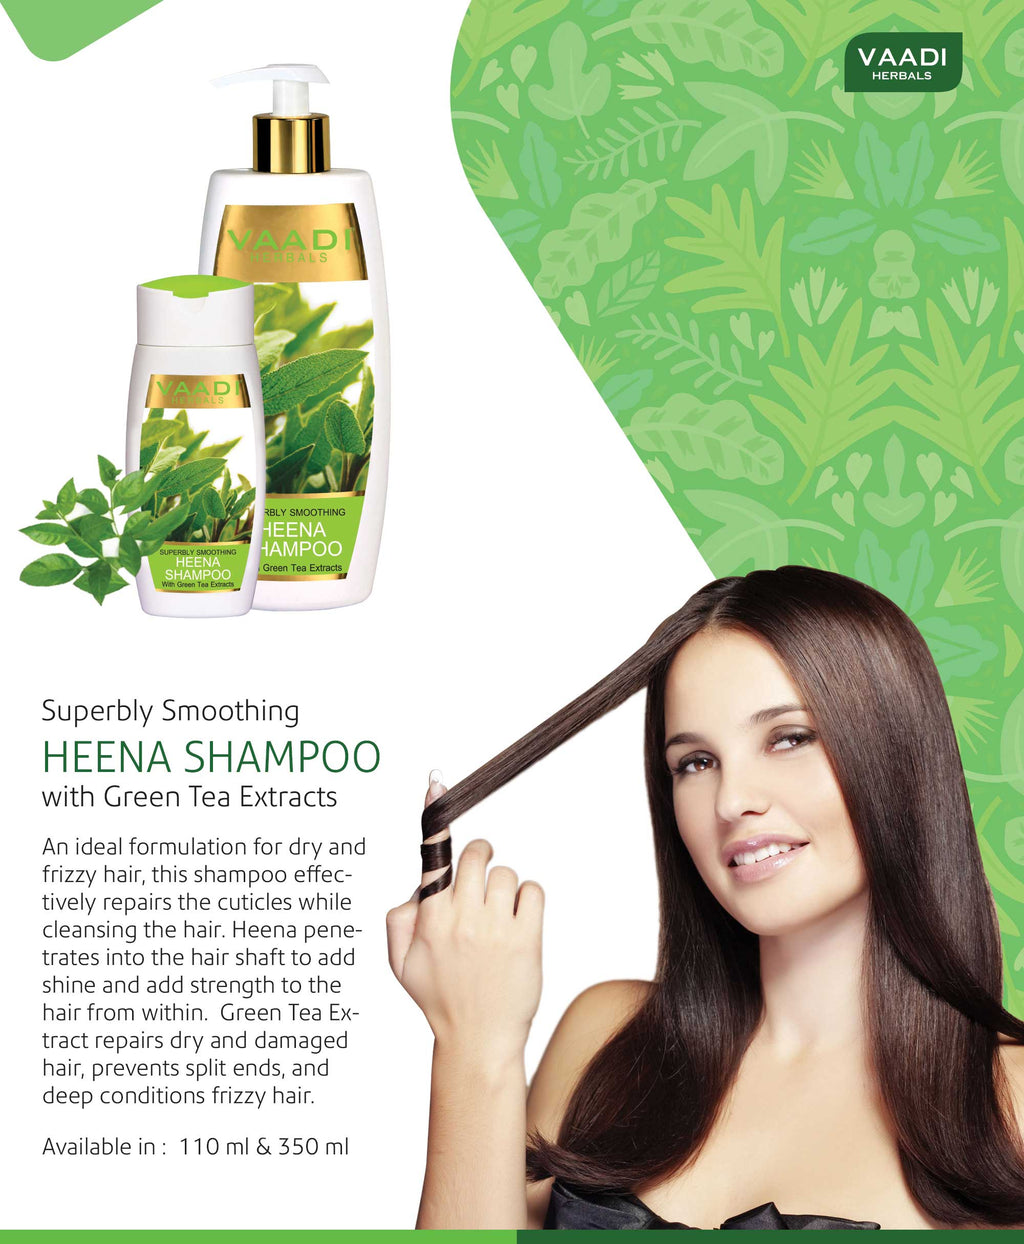 Superbly Smoothing Organic Heena Shampoo with Green Tea Extract 